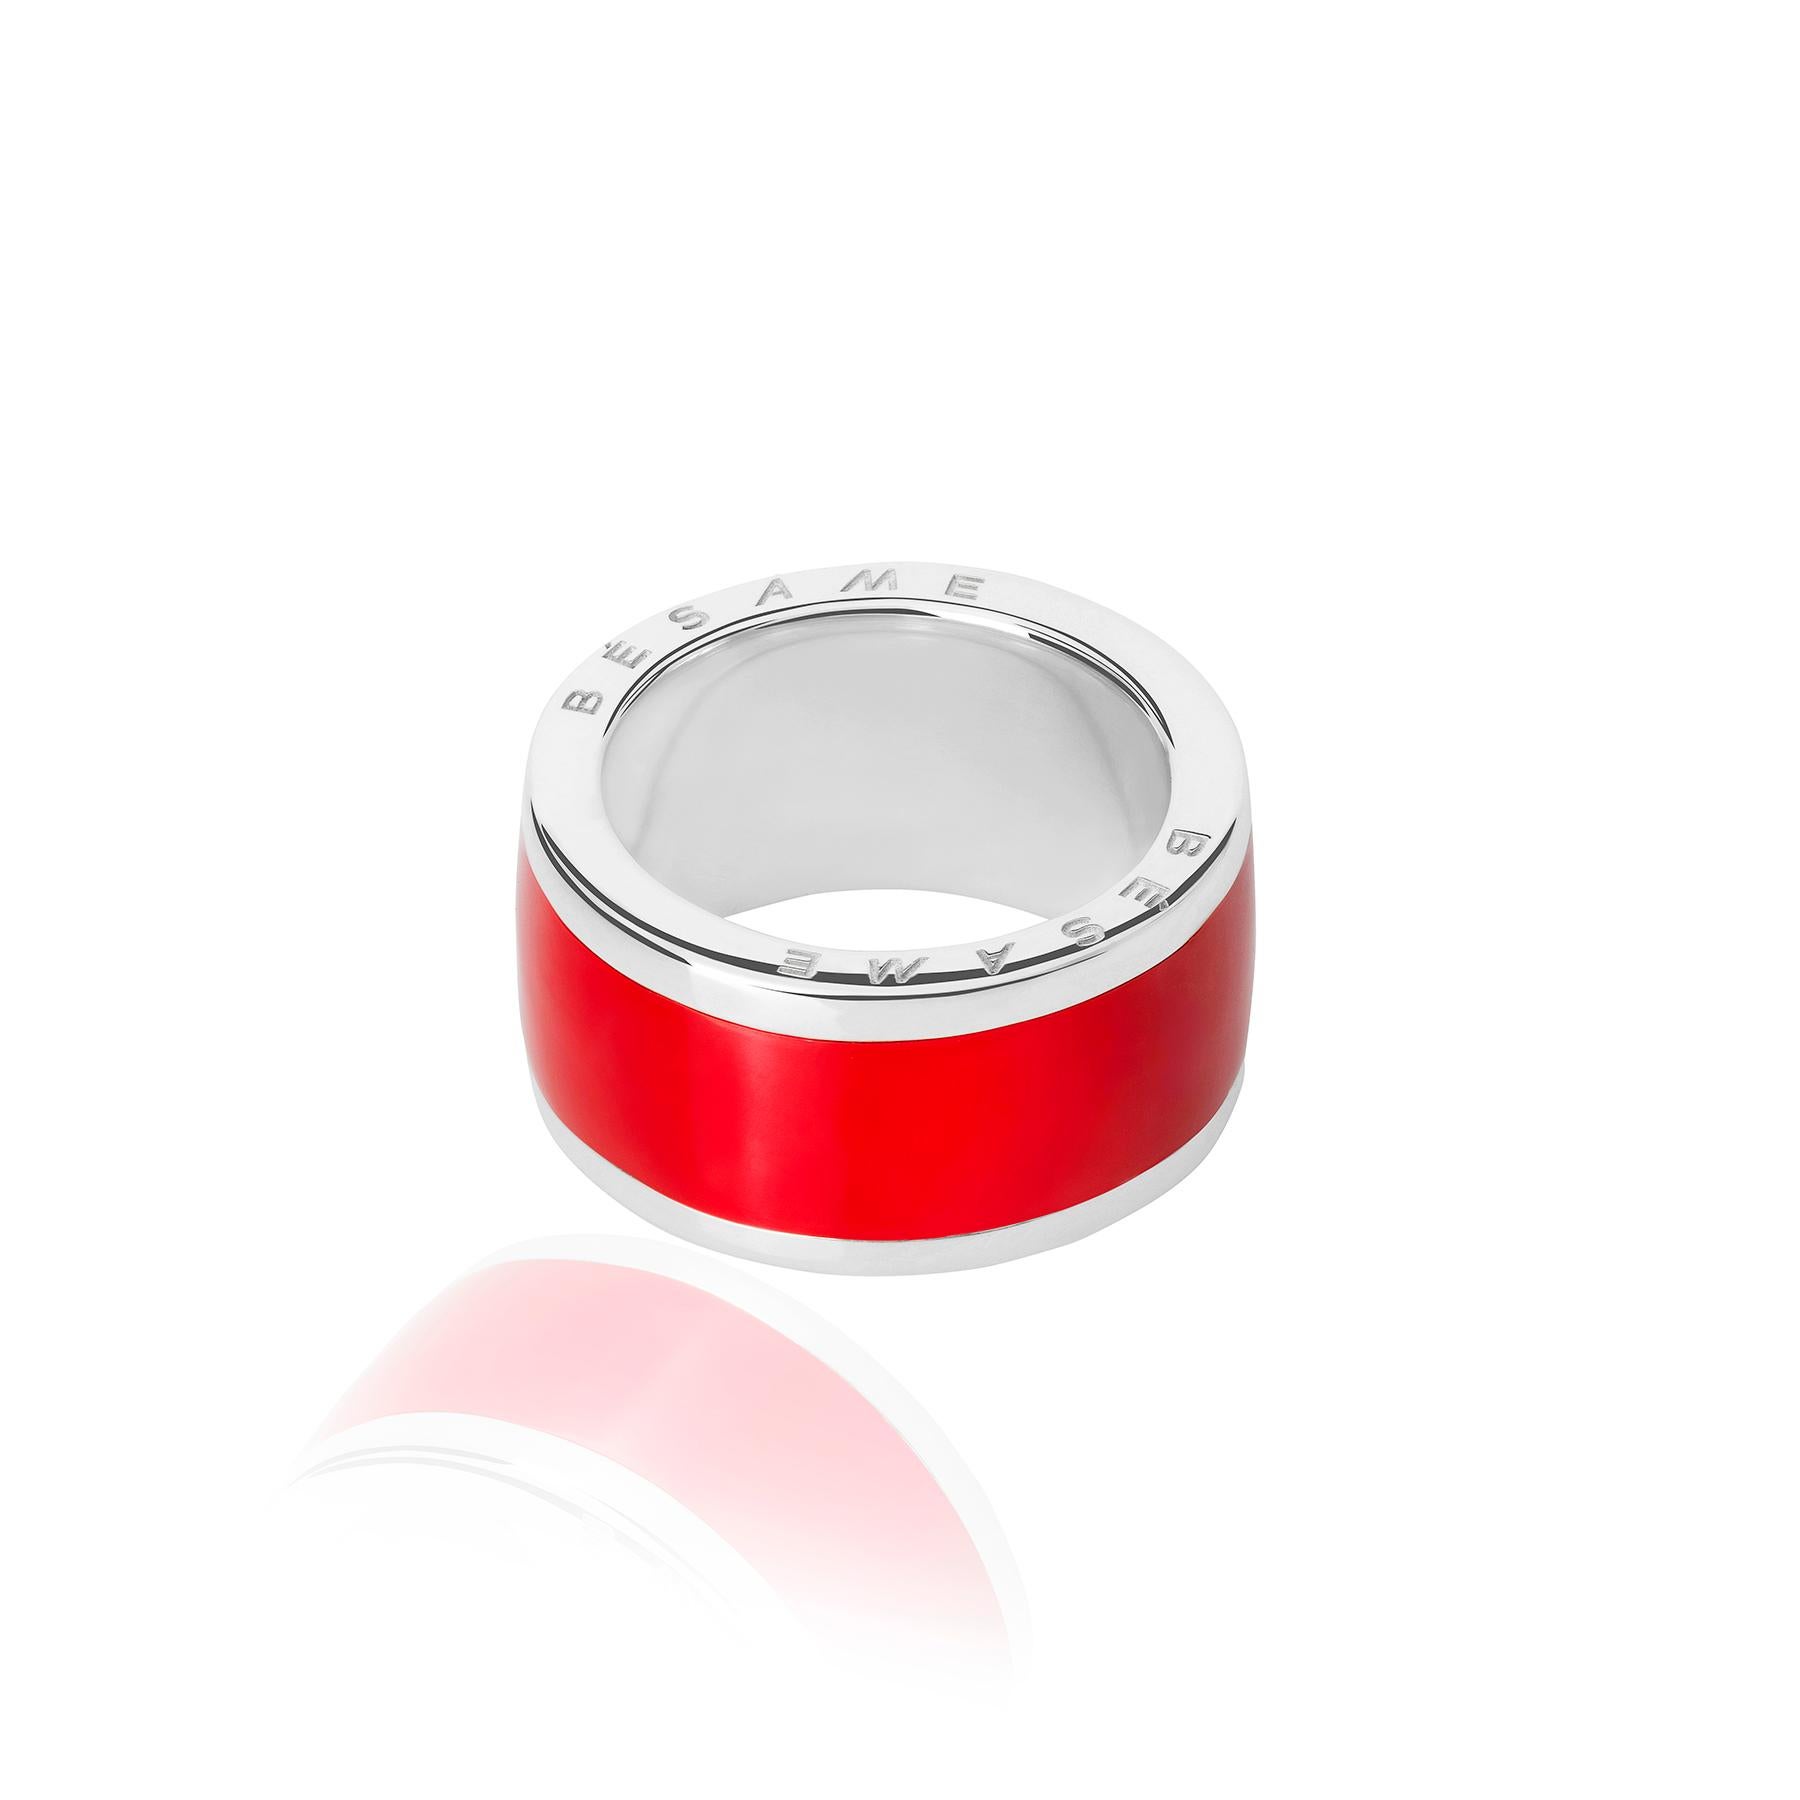 60mm ring size